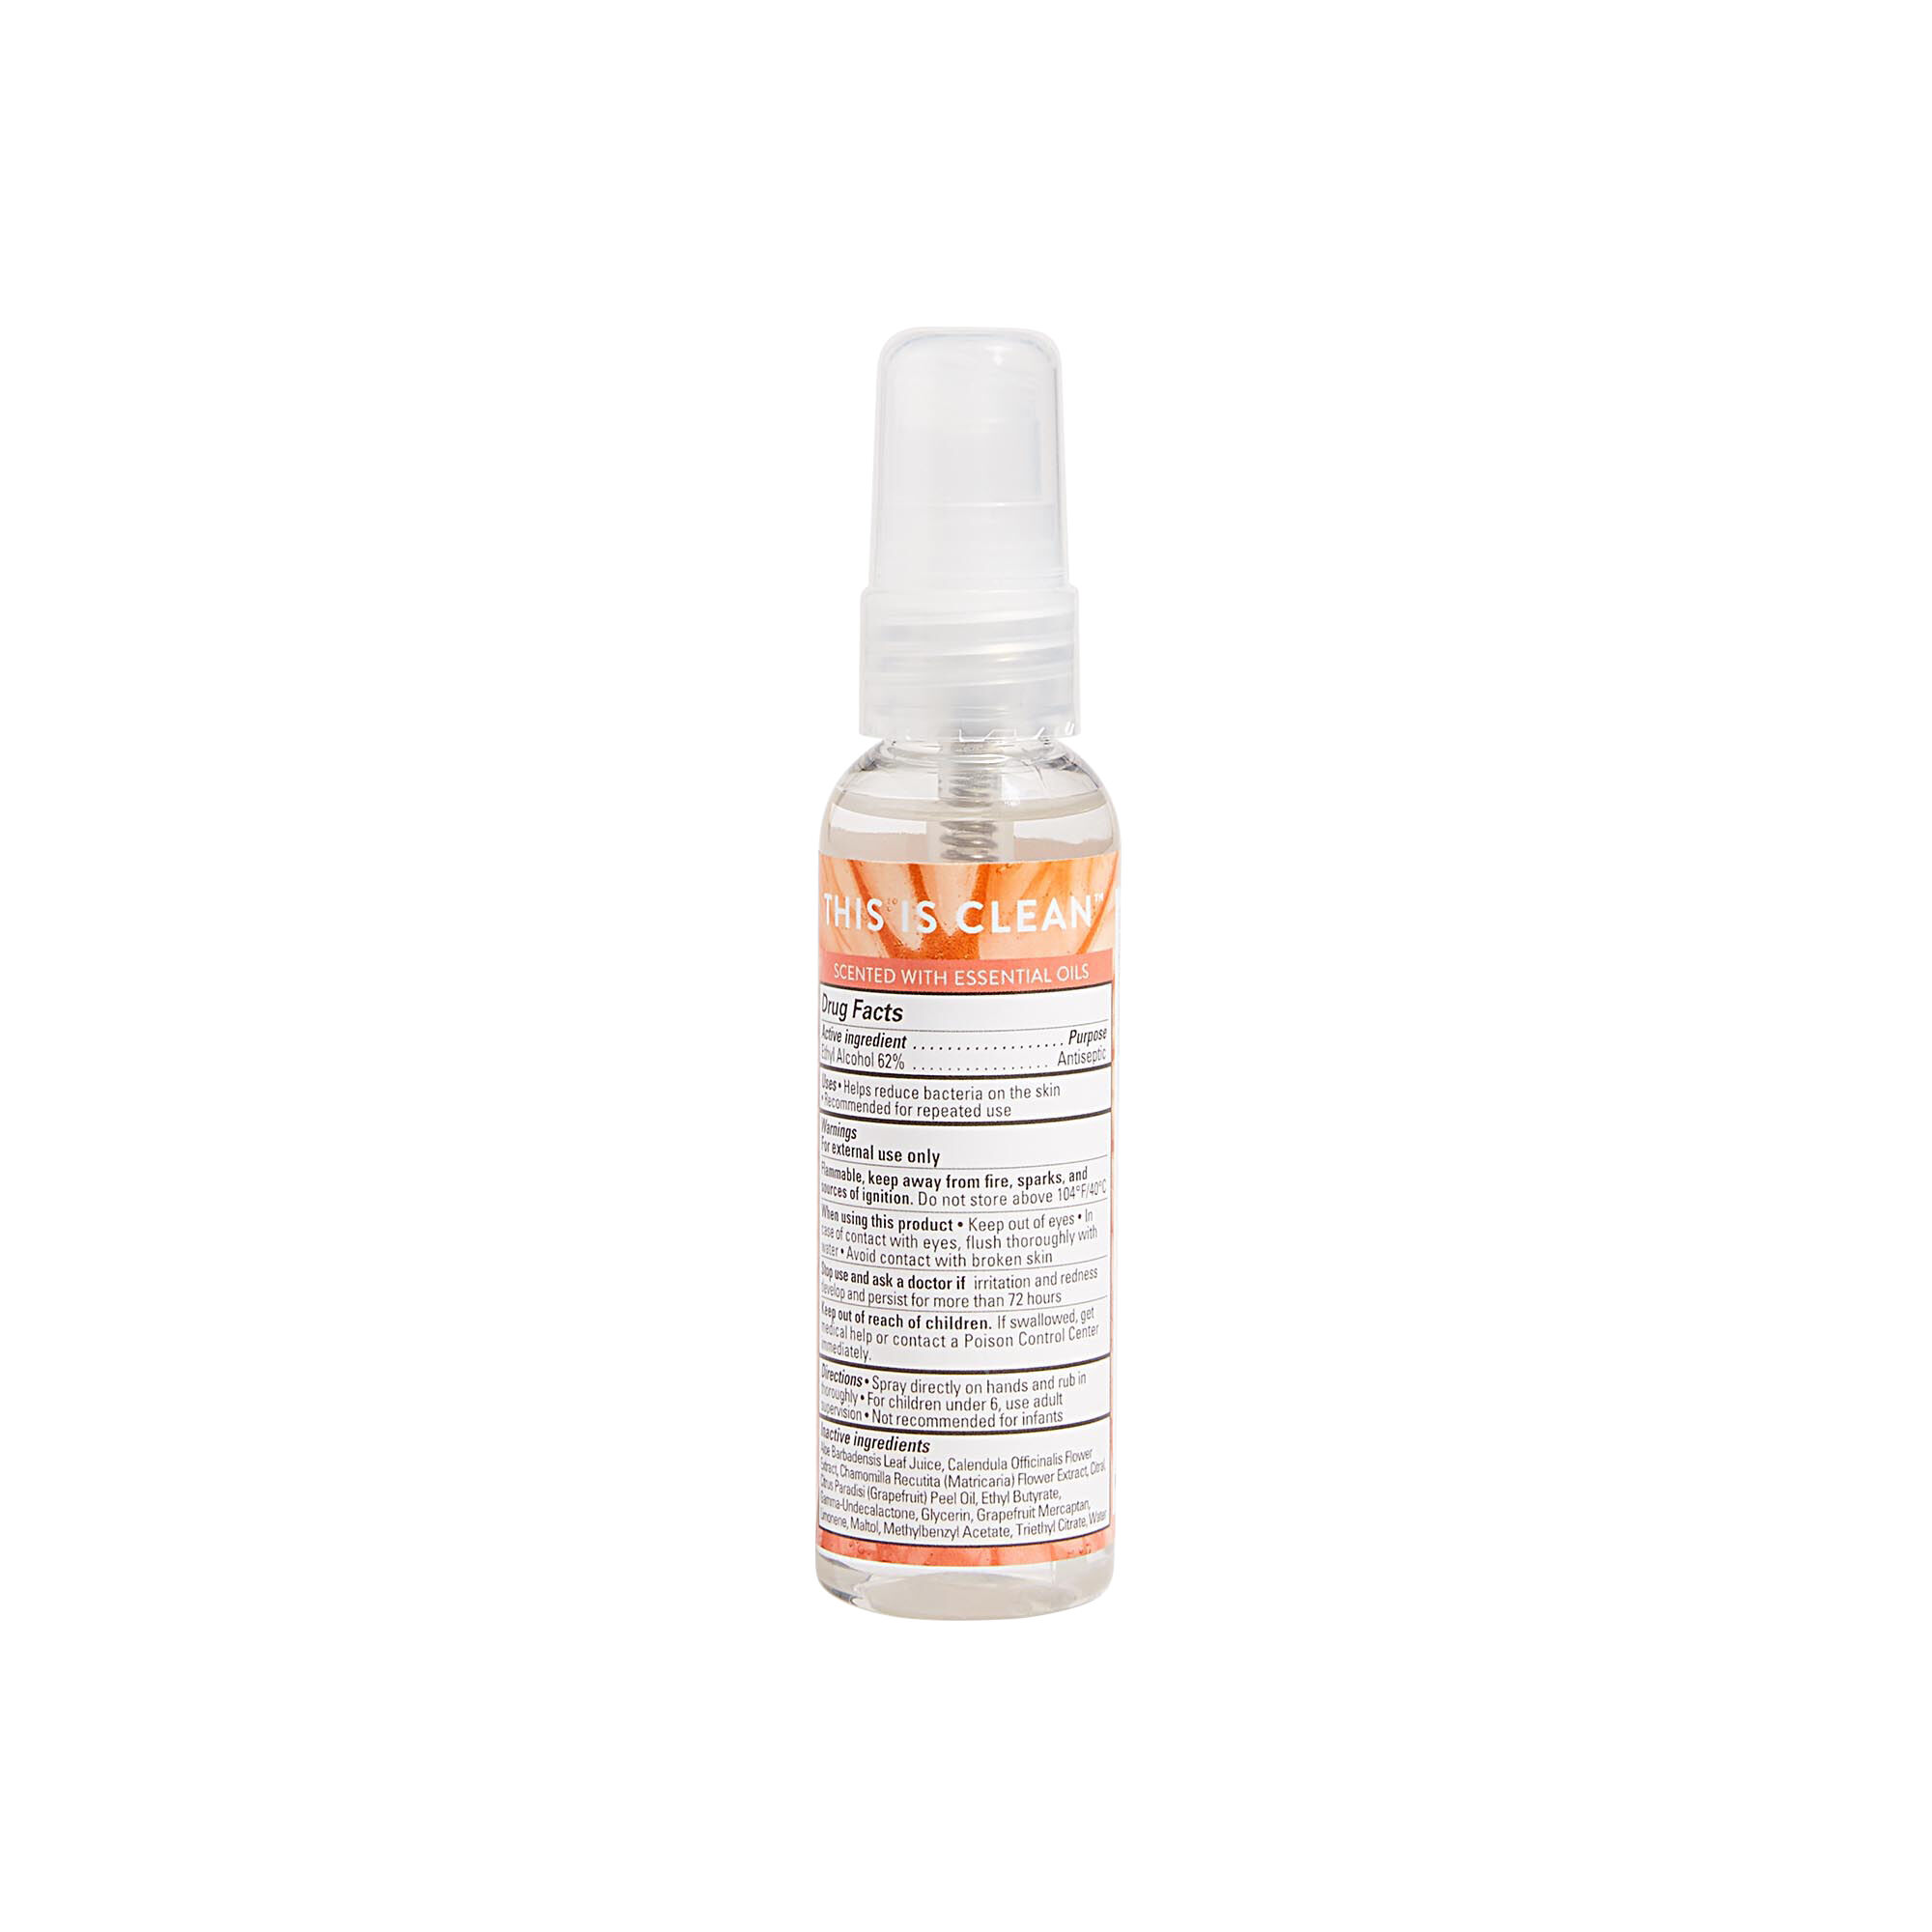 Hand Sanitizer Spray in the Grapefruit Grove Scent Back of Product